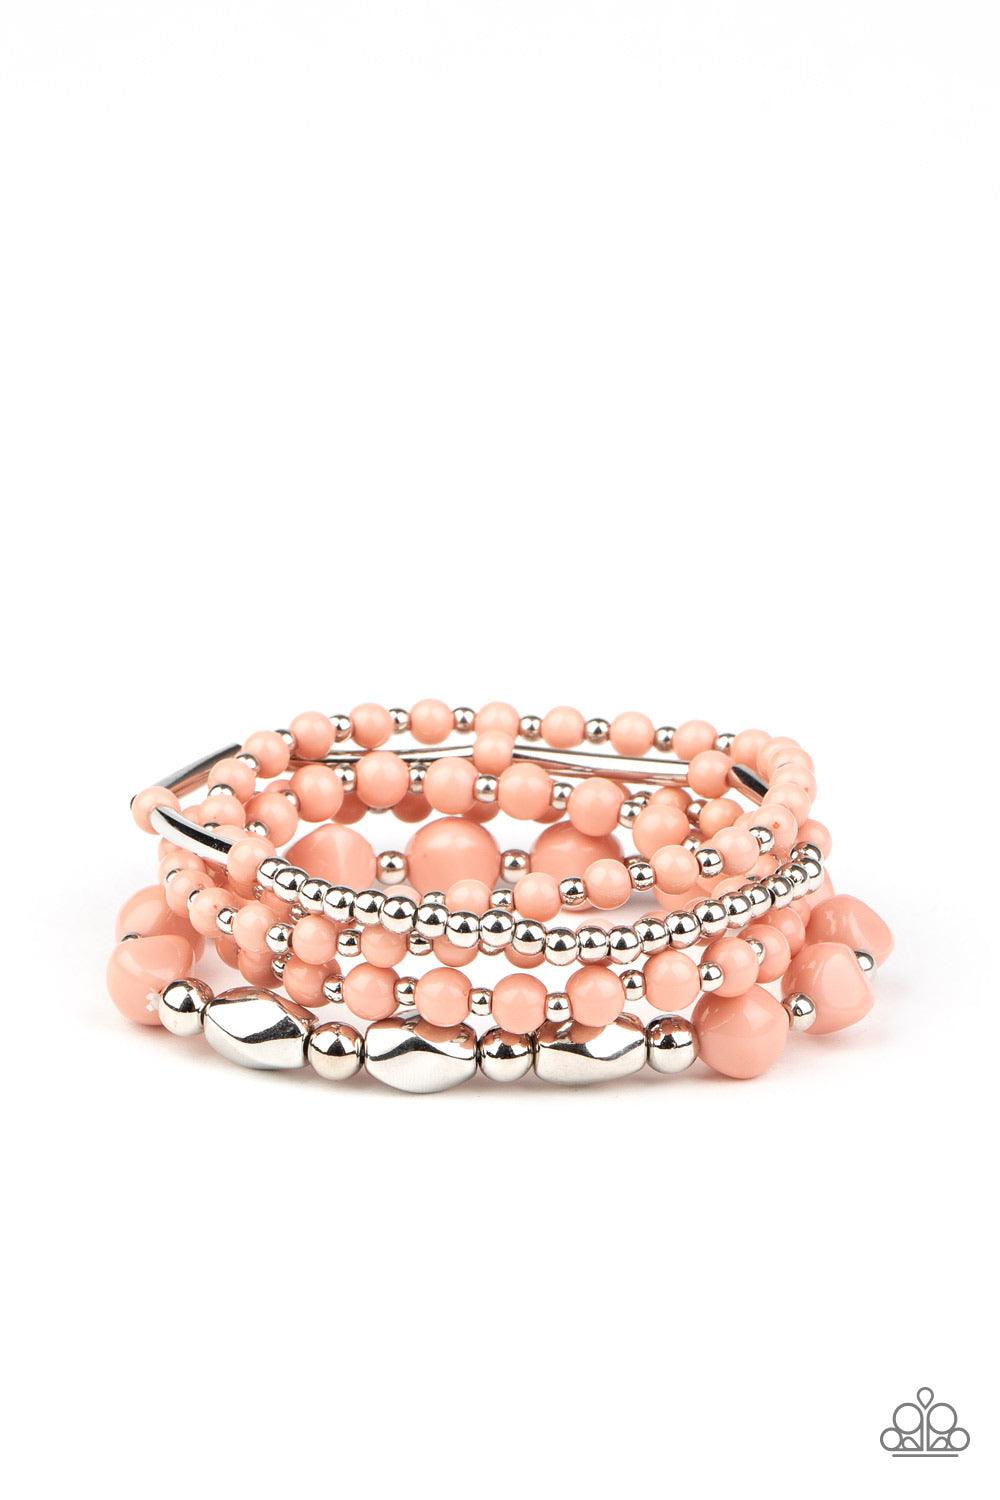 Paparazzi Accessories Vibrantly Vintage ~Pink Infused with dainty silver beads, a mismatched collection of Rose Tan and shiny silver beads are threaded along stretchy bands around the wrist for a colorfully layered look. Sold as one set of five bracelets.